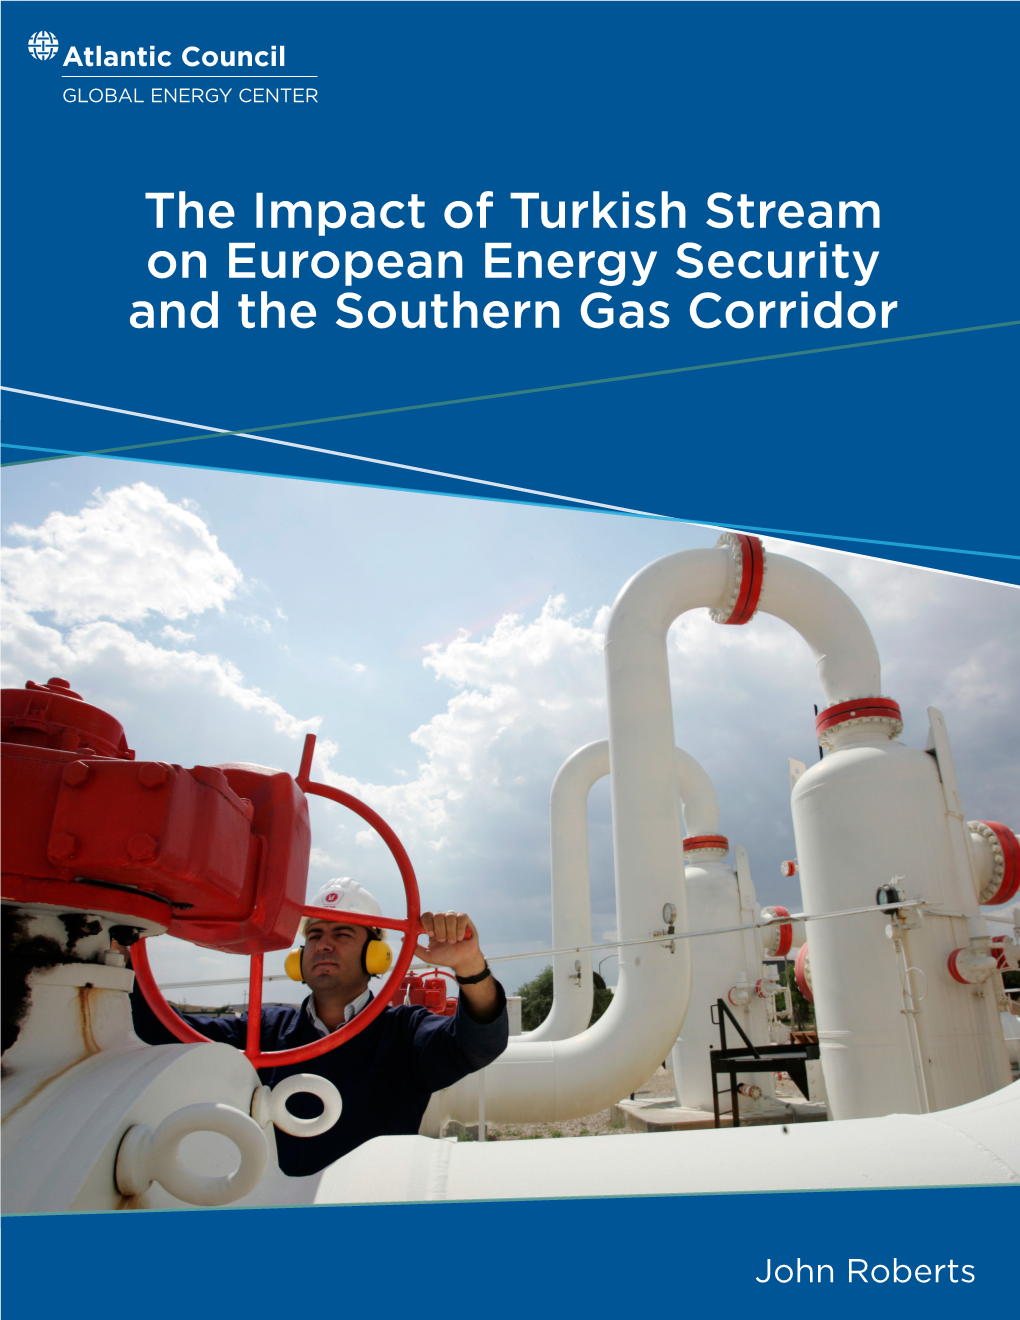 The Impact of Turkish Stream on European Energy Security and the Southern Gas Corridor